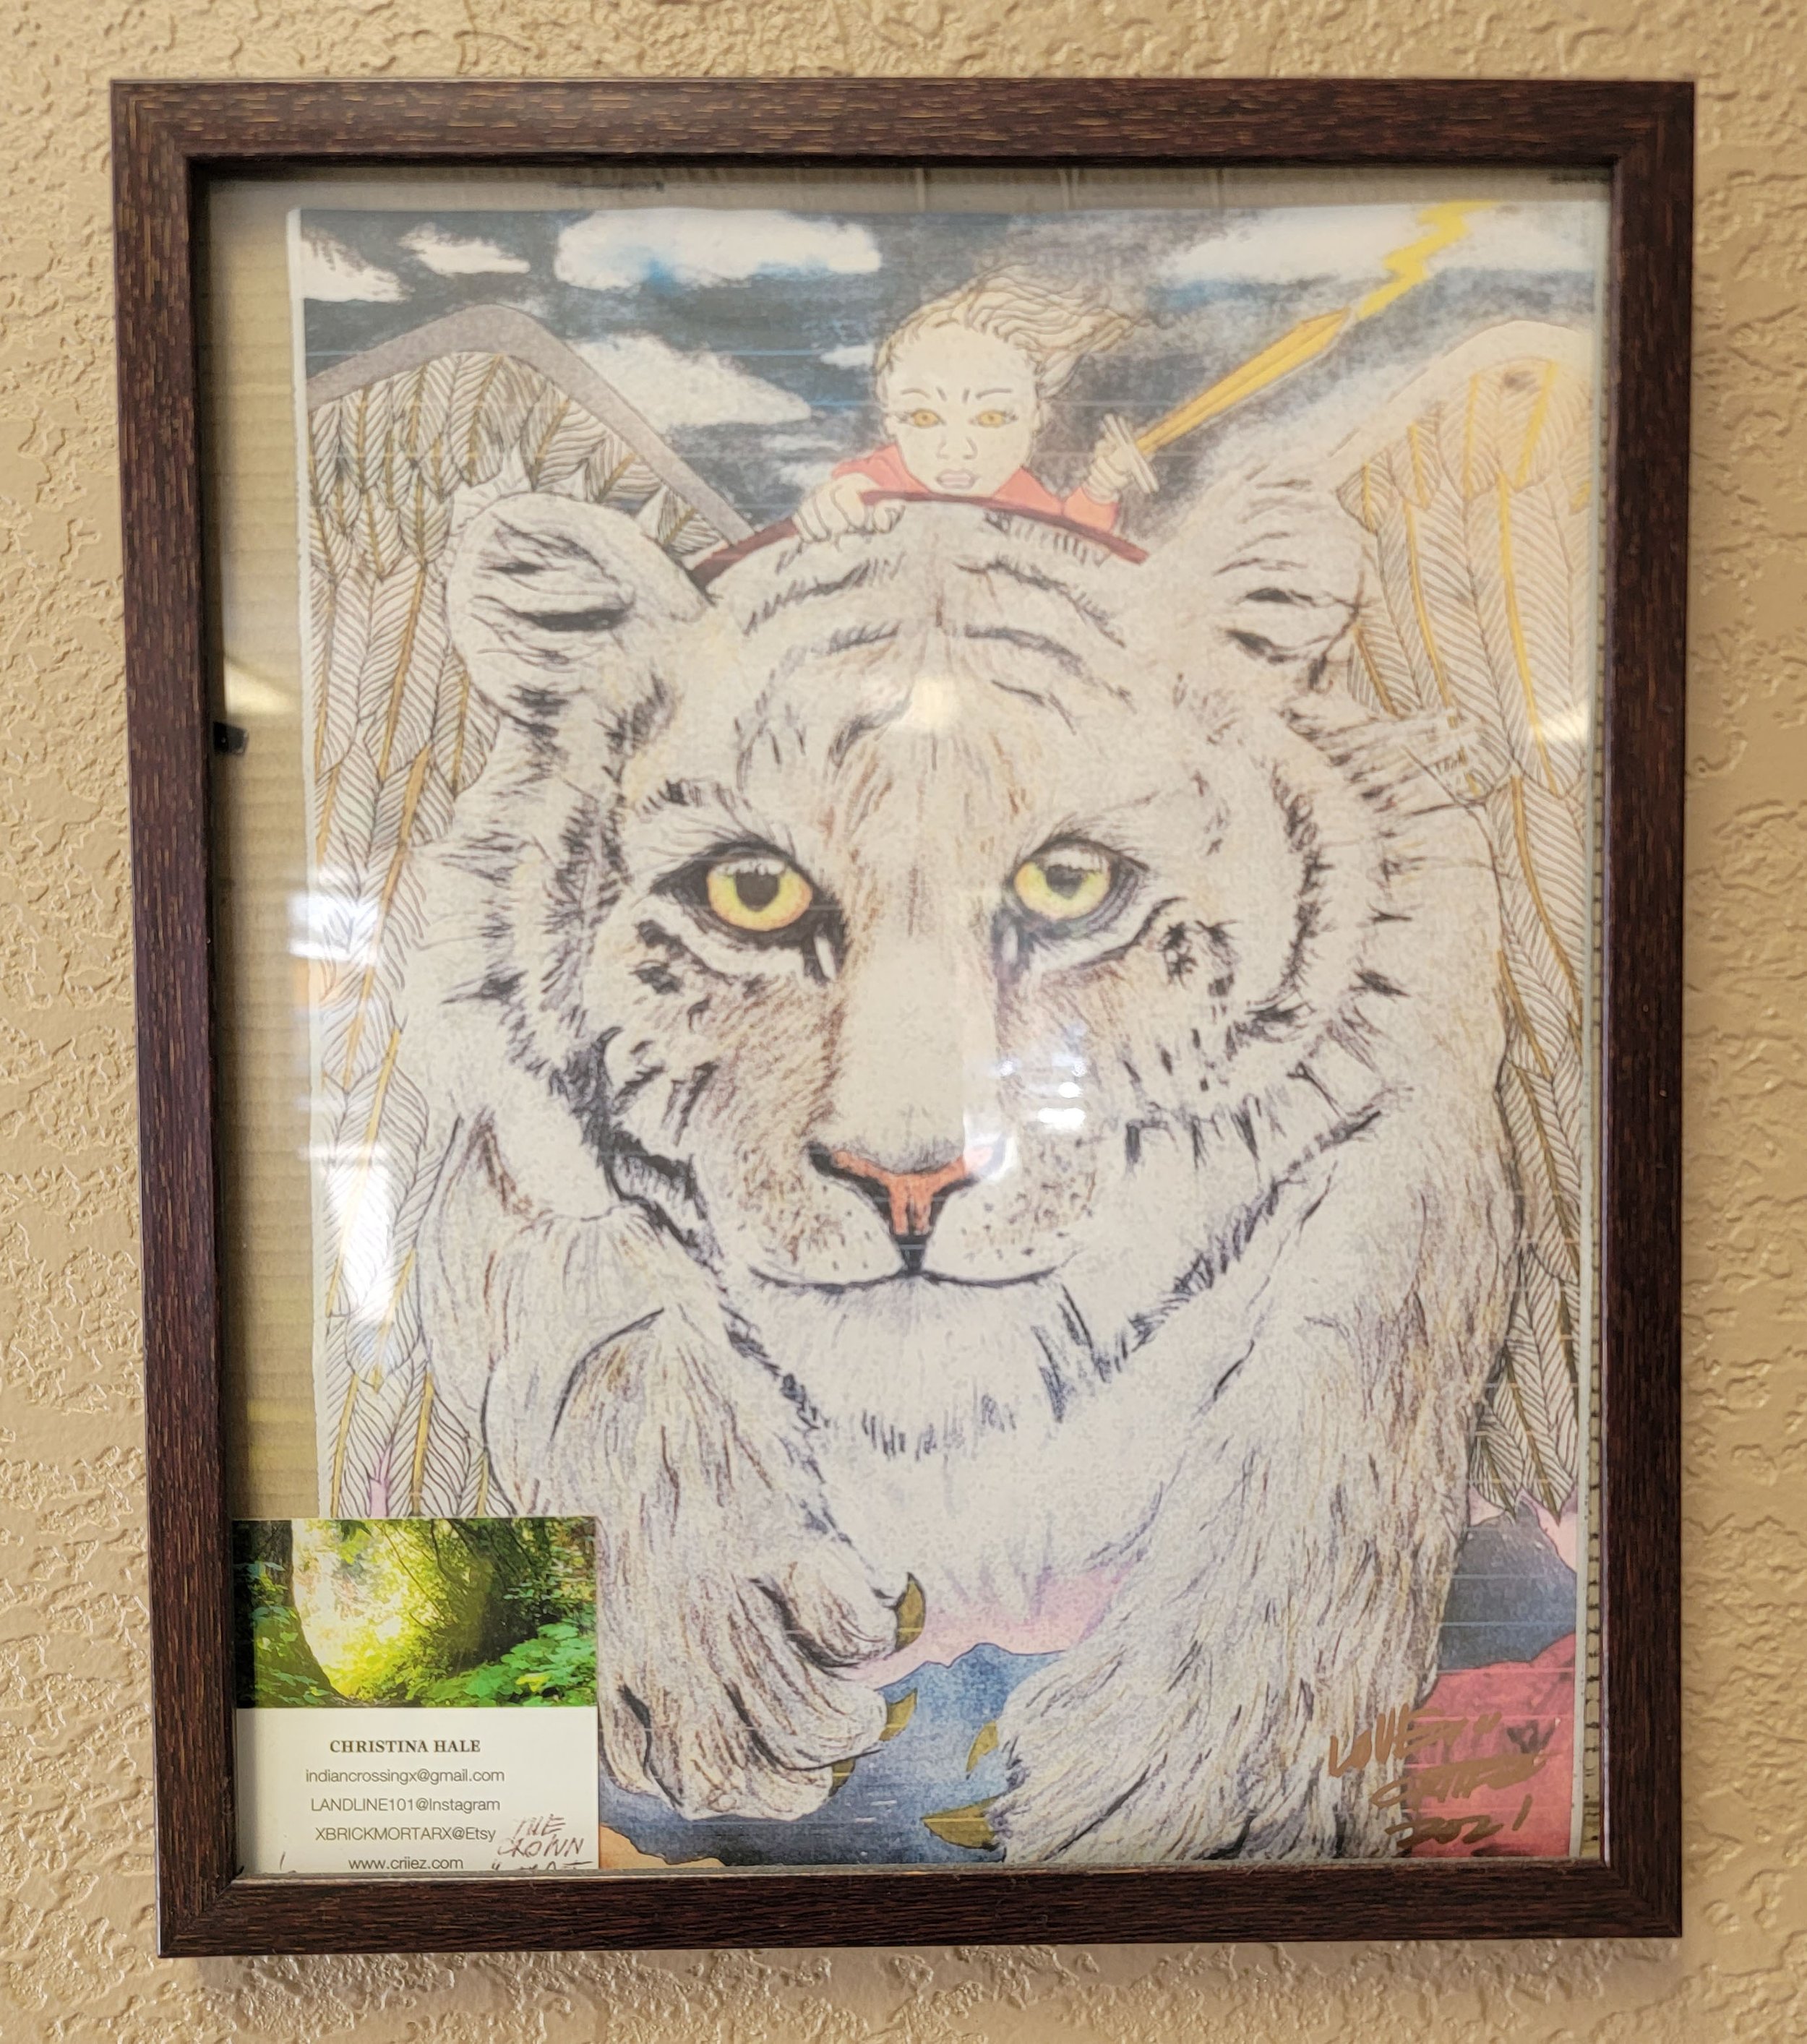 Art for sale at a little coffee shop. Seems like a bargain if you ask me.